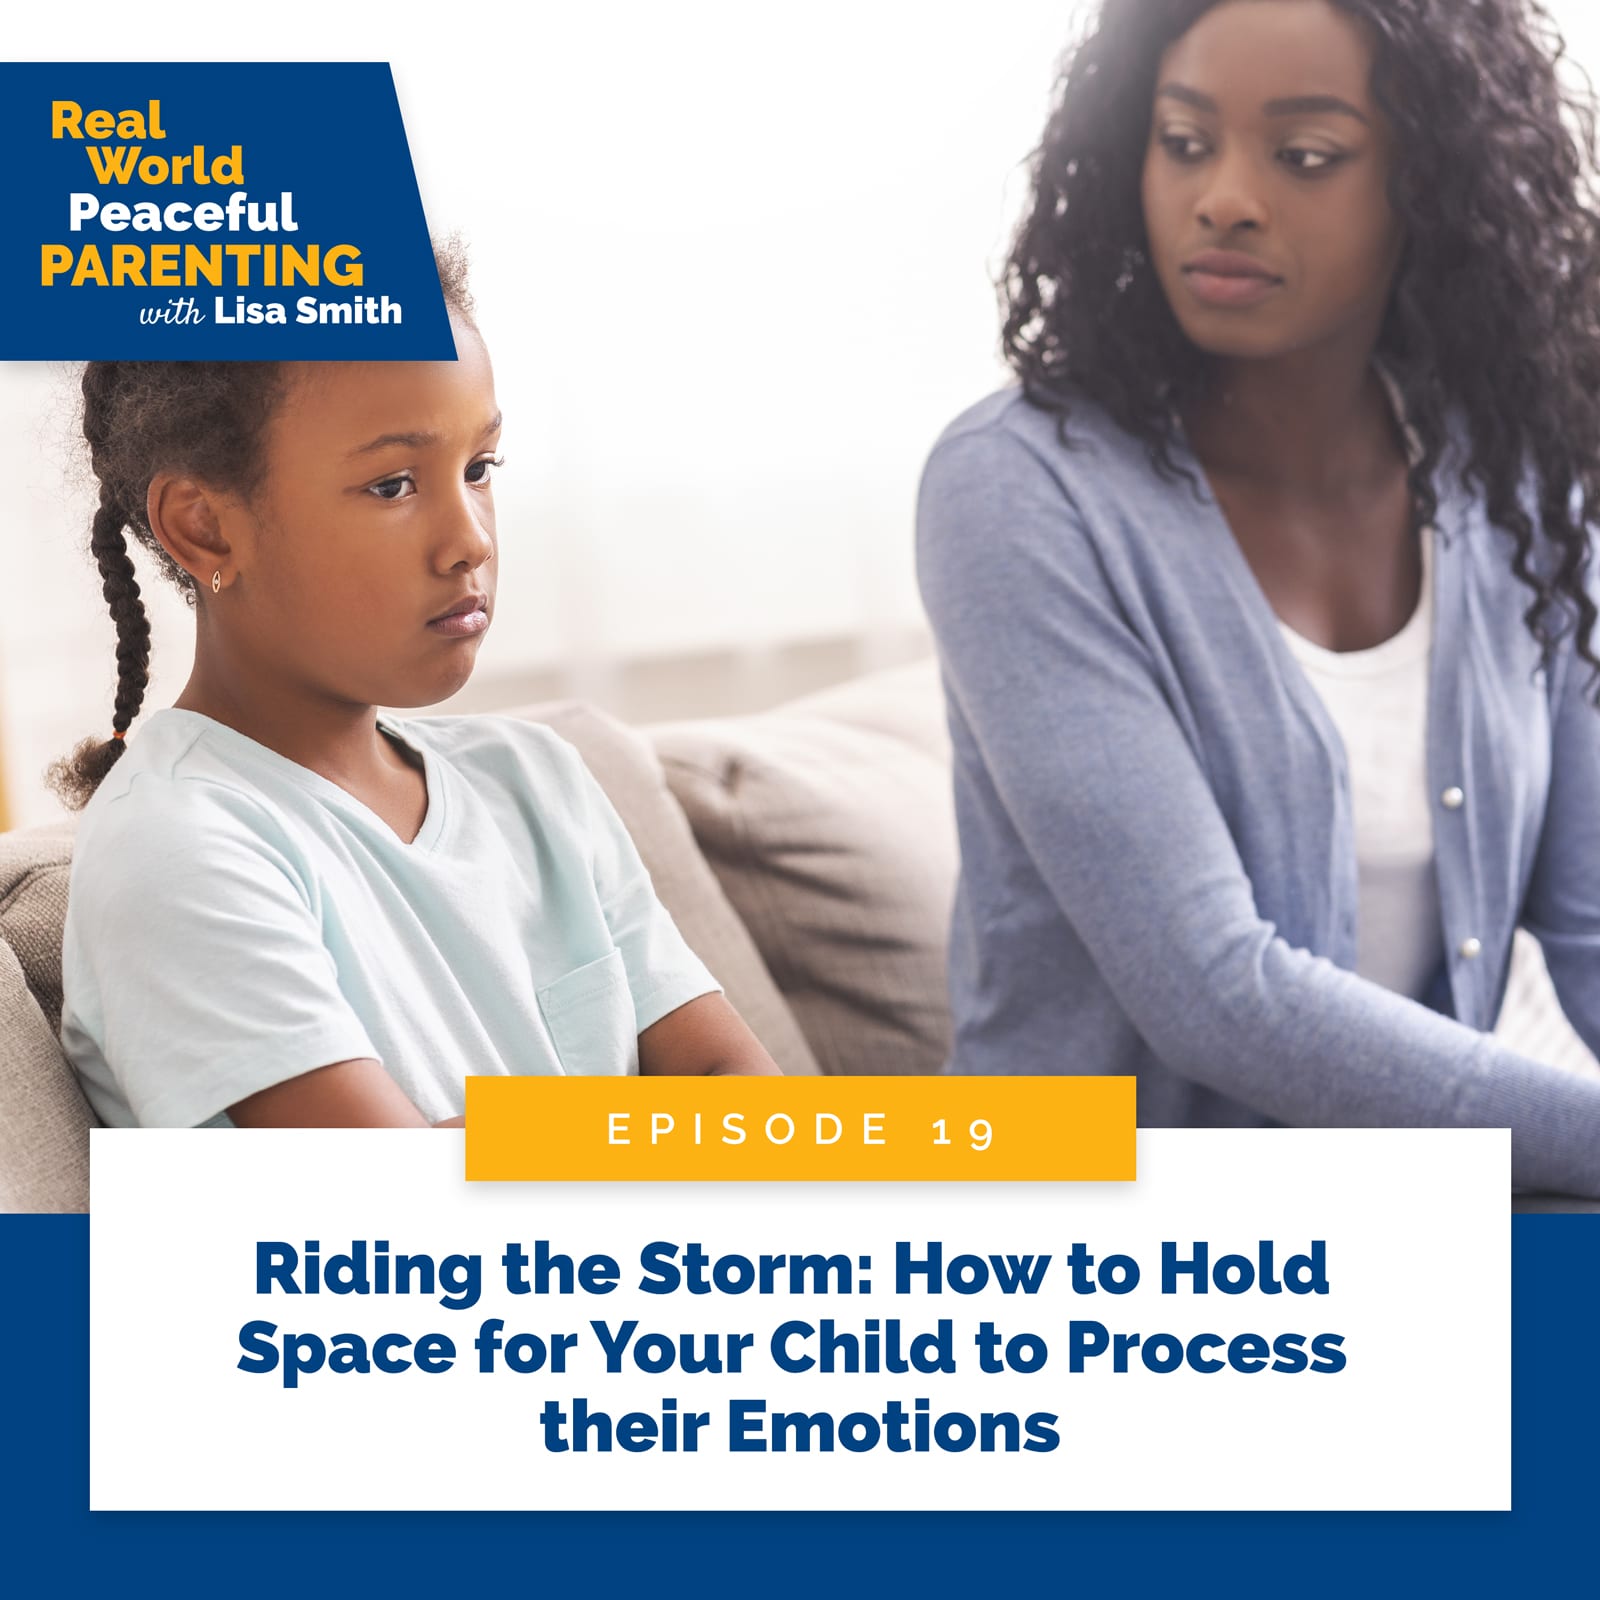 Real World Peaceful Parenting with Lisa Smith | Riding the Storm: How to Hold Space for Your Child to Process their Emotions